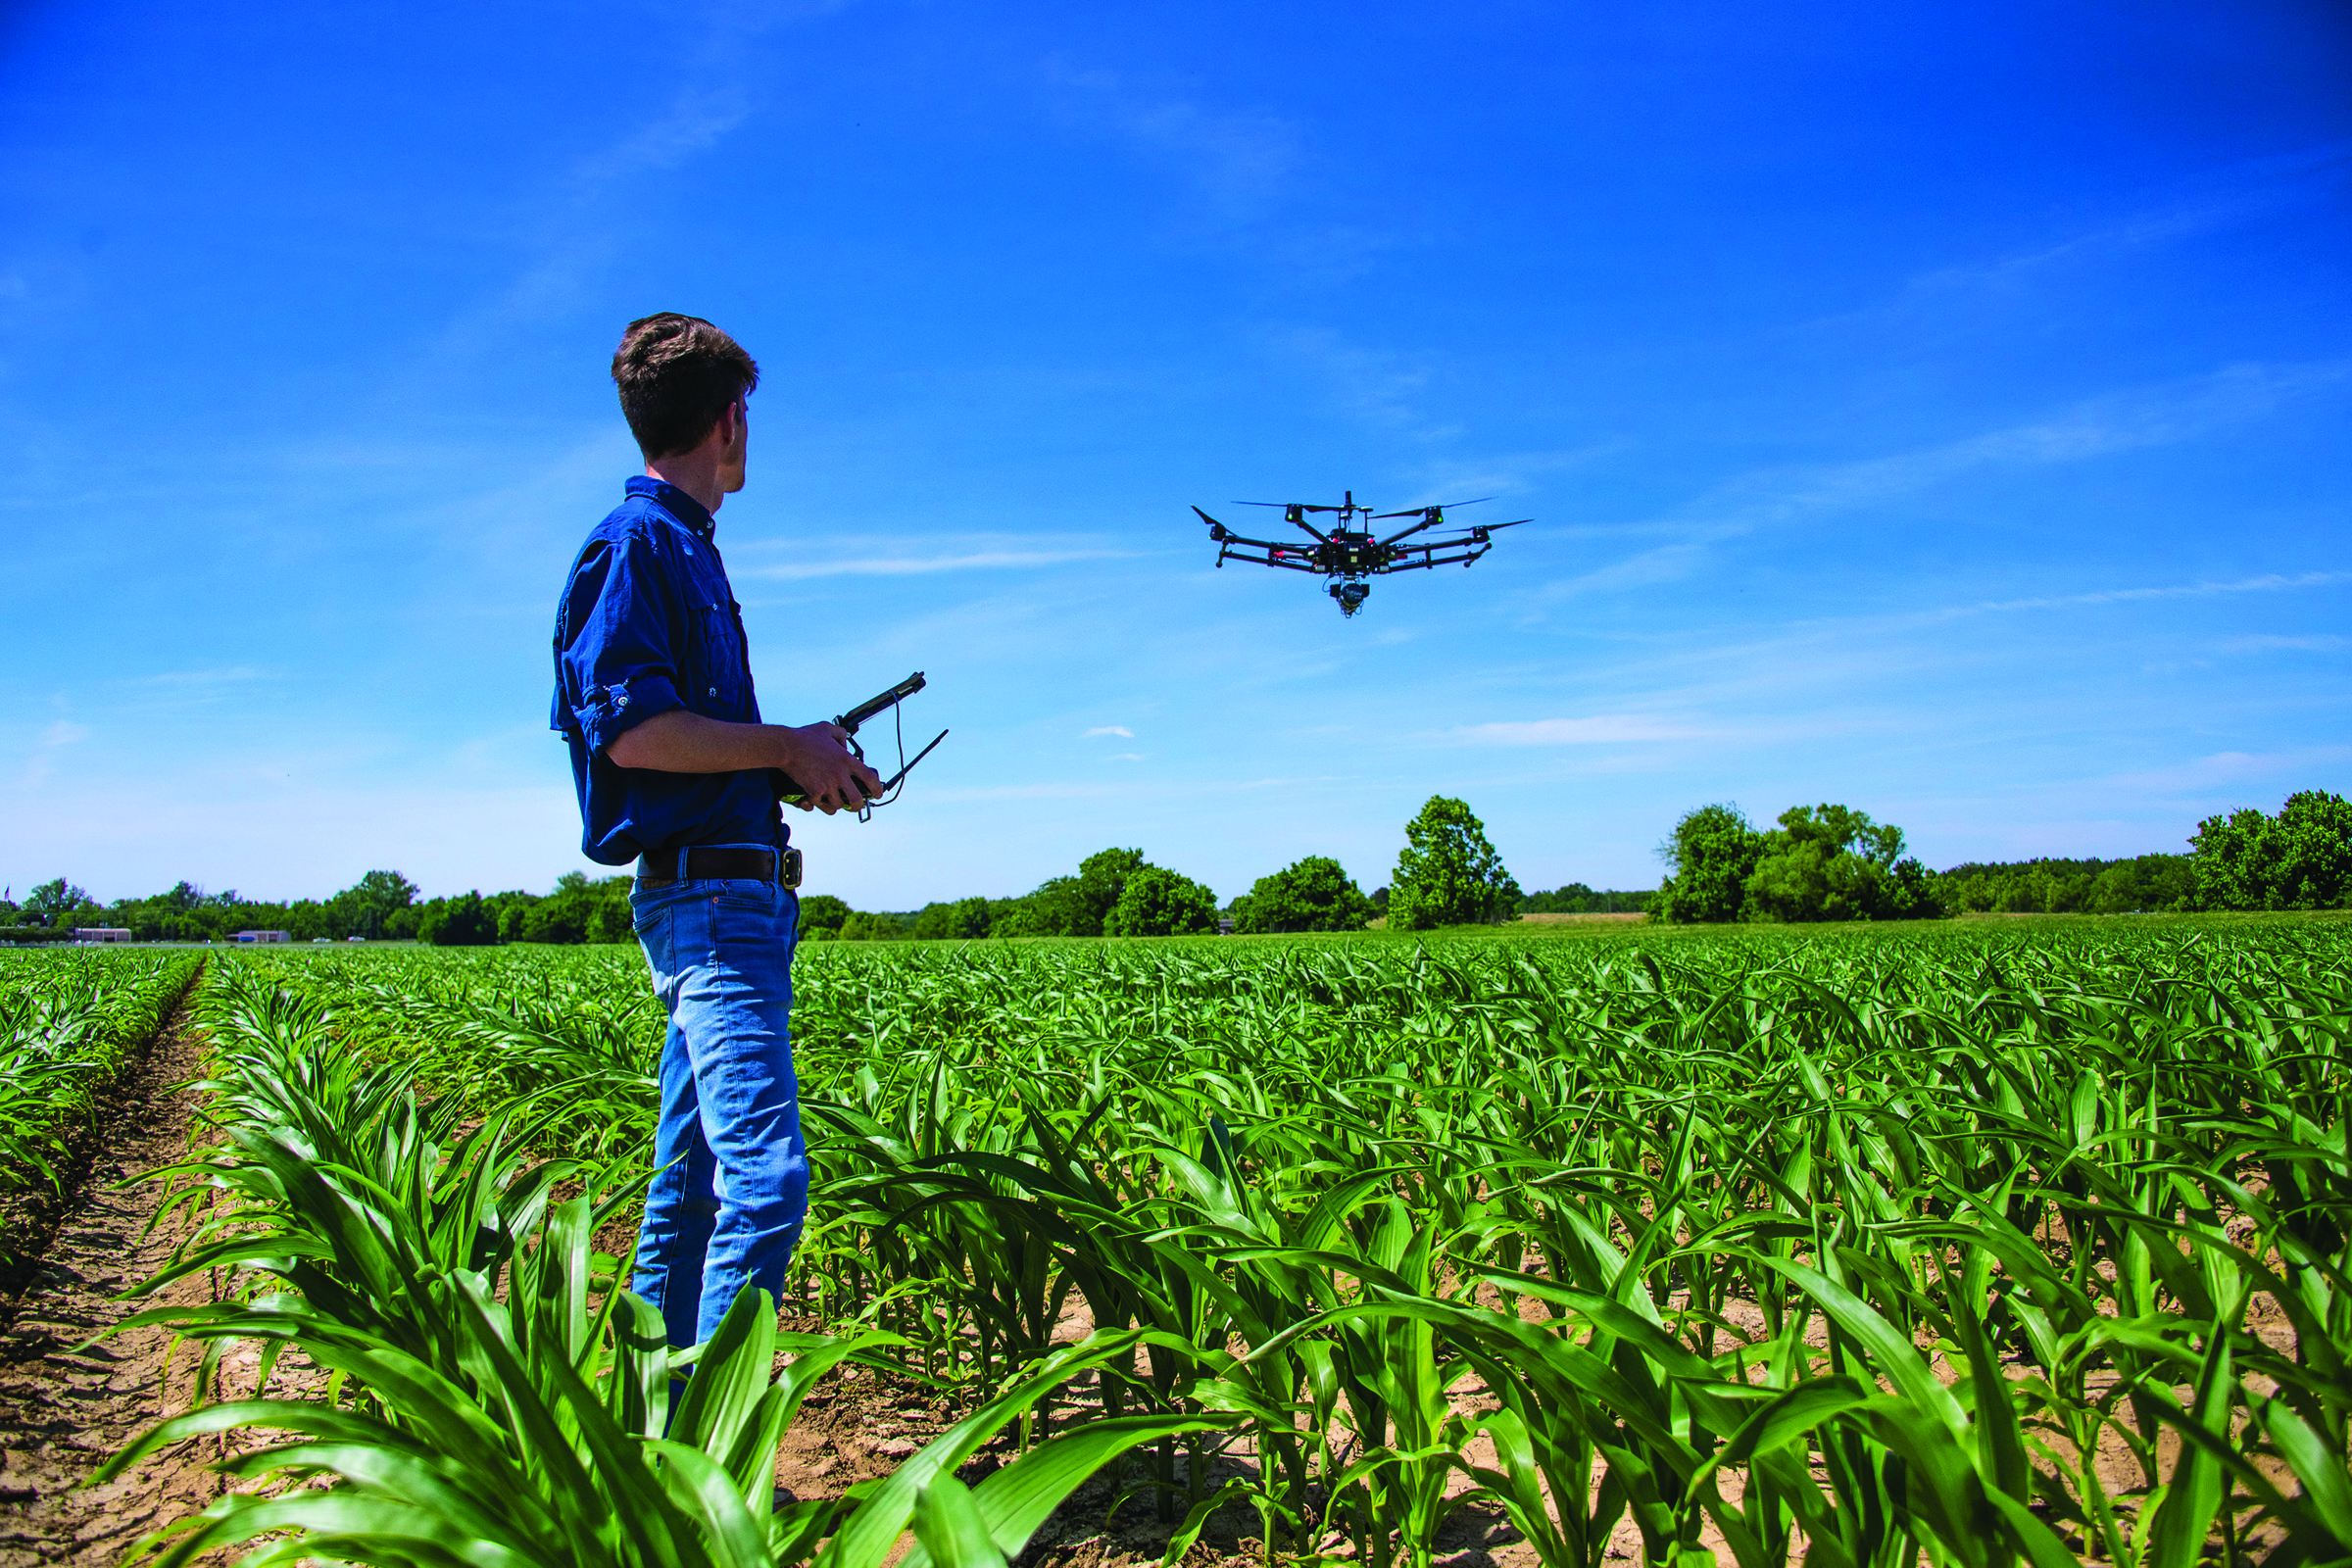 Student with drone in field of crops